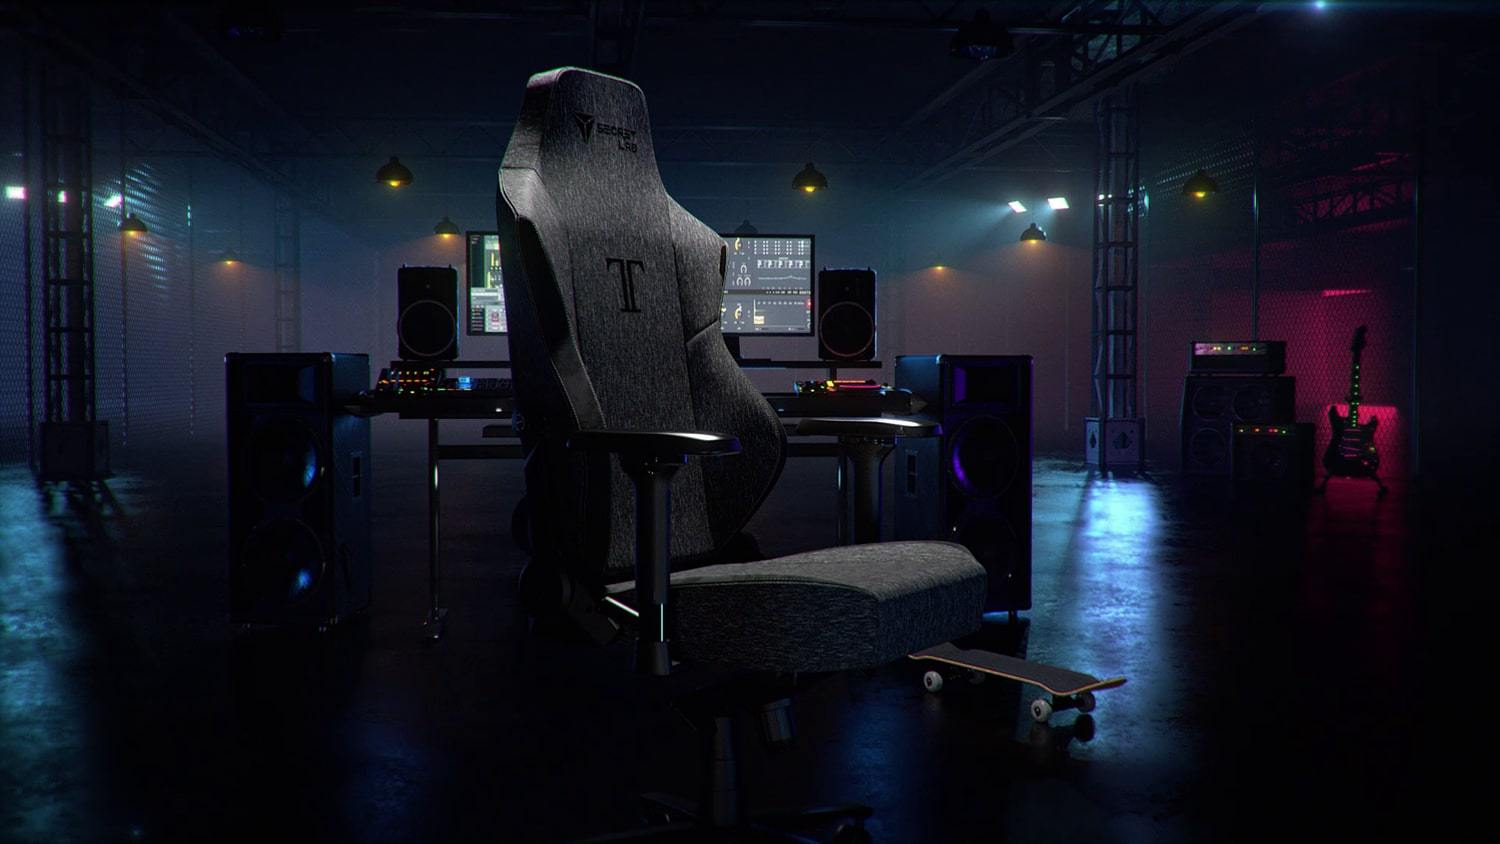 The Top 4 Xbox One Gaming Chairs to Buy in 2018